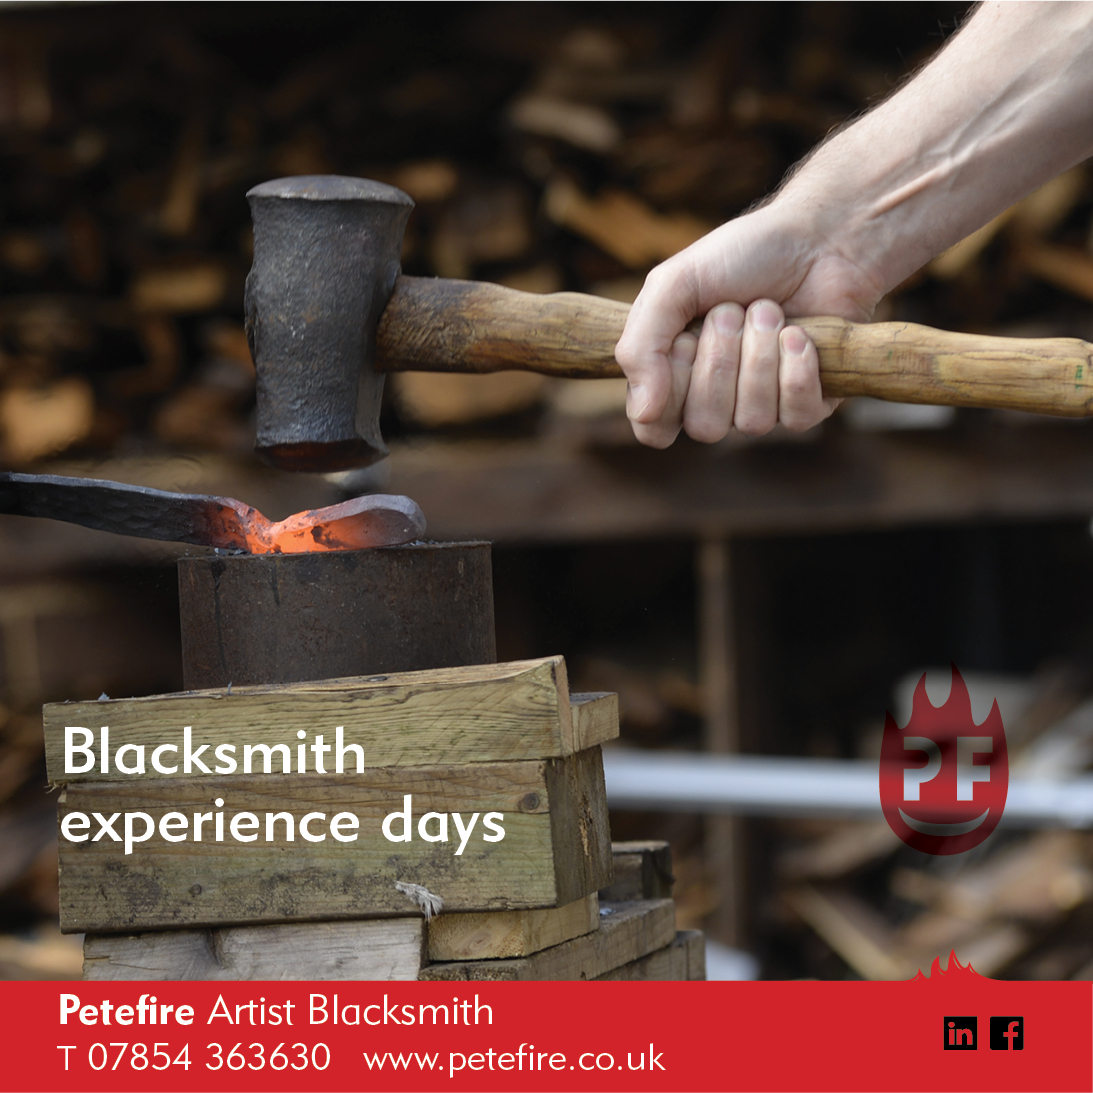 Petefire Artist Blacksmith, forging experience days in Chiswell Green, St Albans, Herts